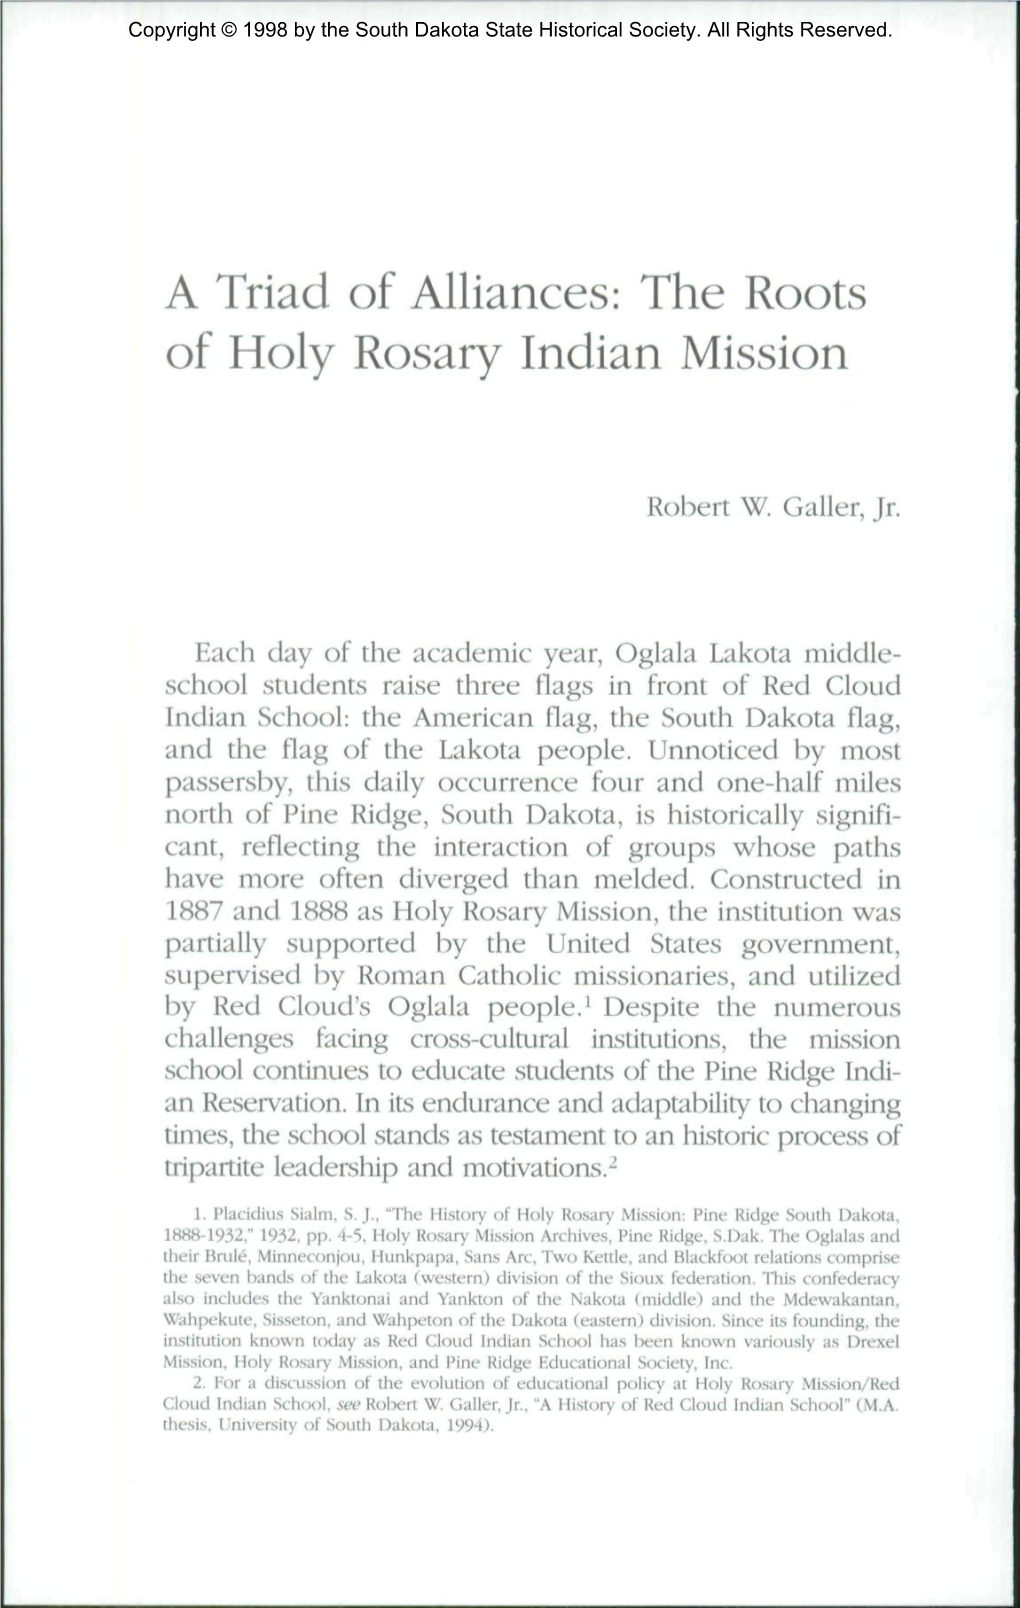 A Triad of Alliances: the Roots of Holy Rosary Indian Mission